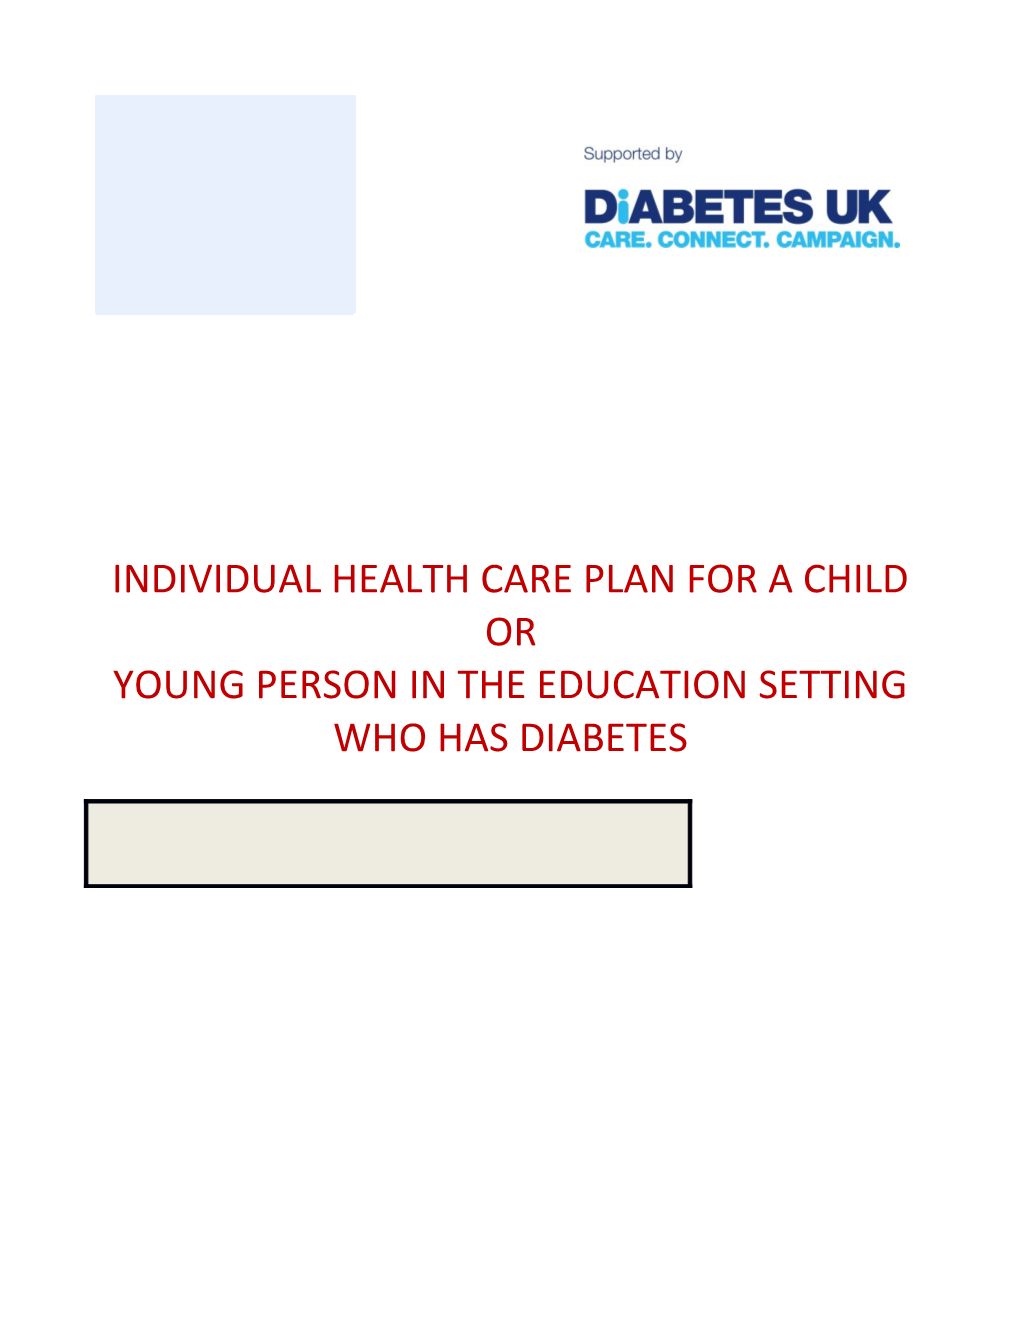 Young Person in the Education Settingwho Has Diabetes